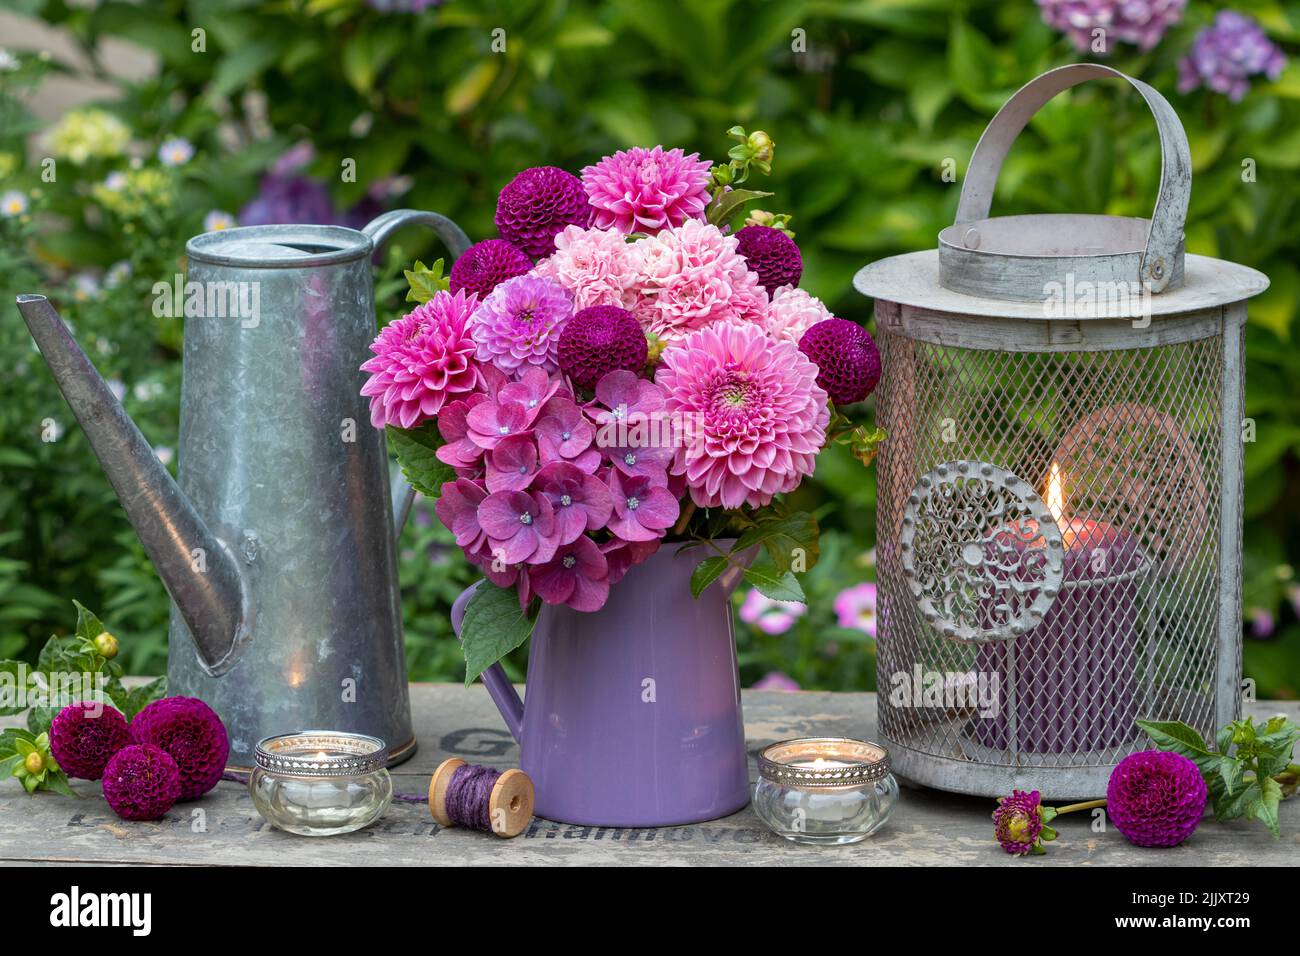 romantic arrangement with bouquet of pink and purple flowers and vintage lantern Stock Photo